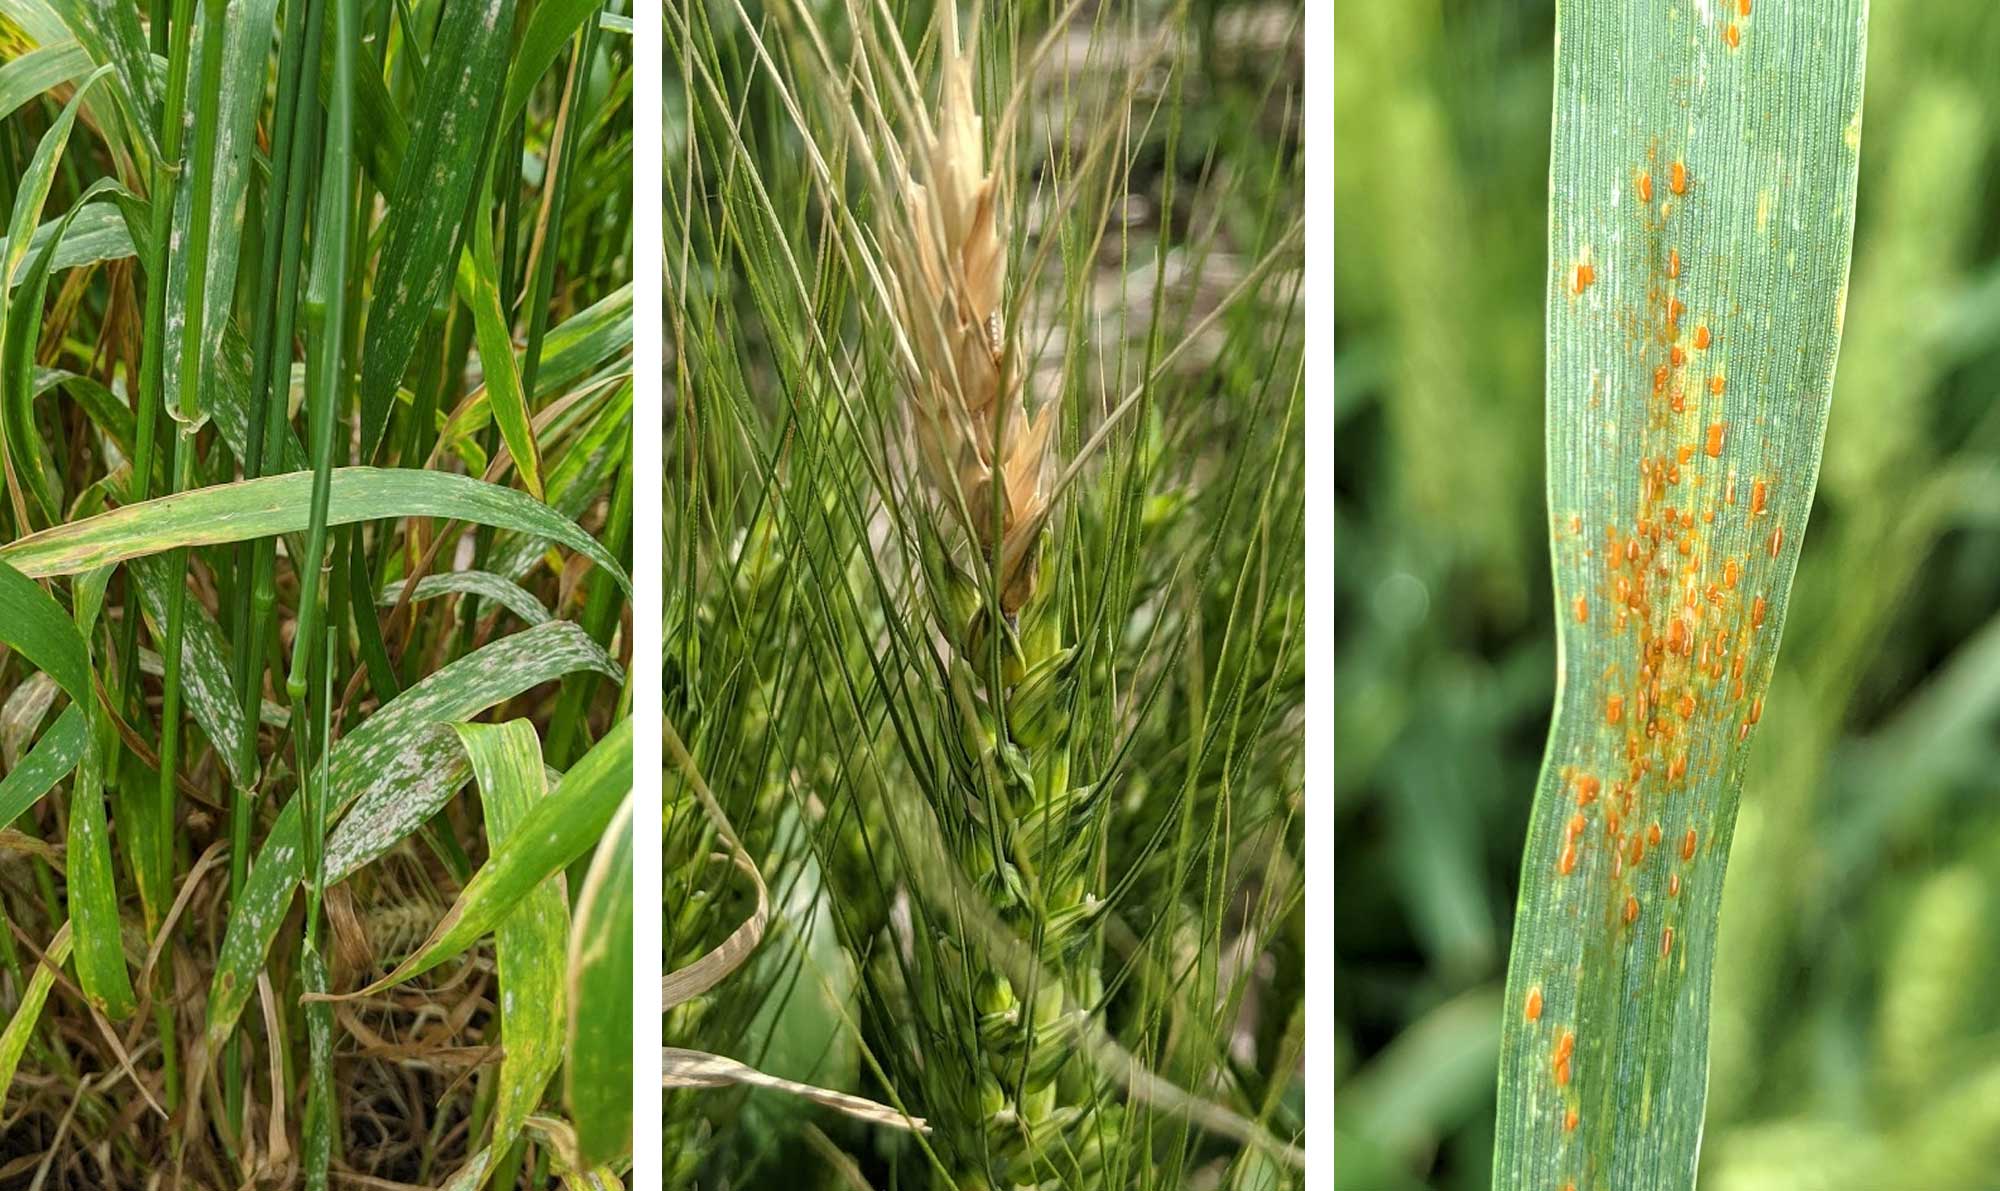 Diseases on three different wheat plants. From the left: powdery mildew, fusarium head blight, and leaf rust.